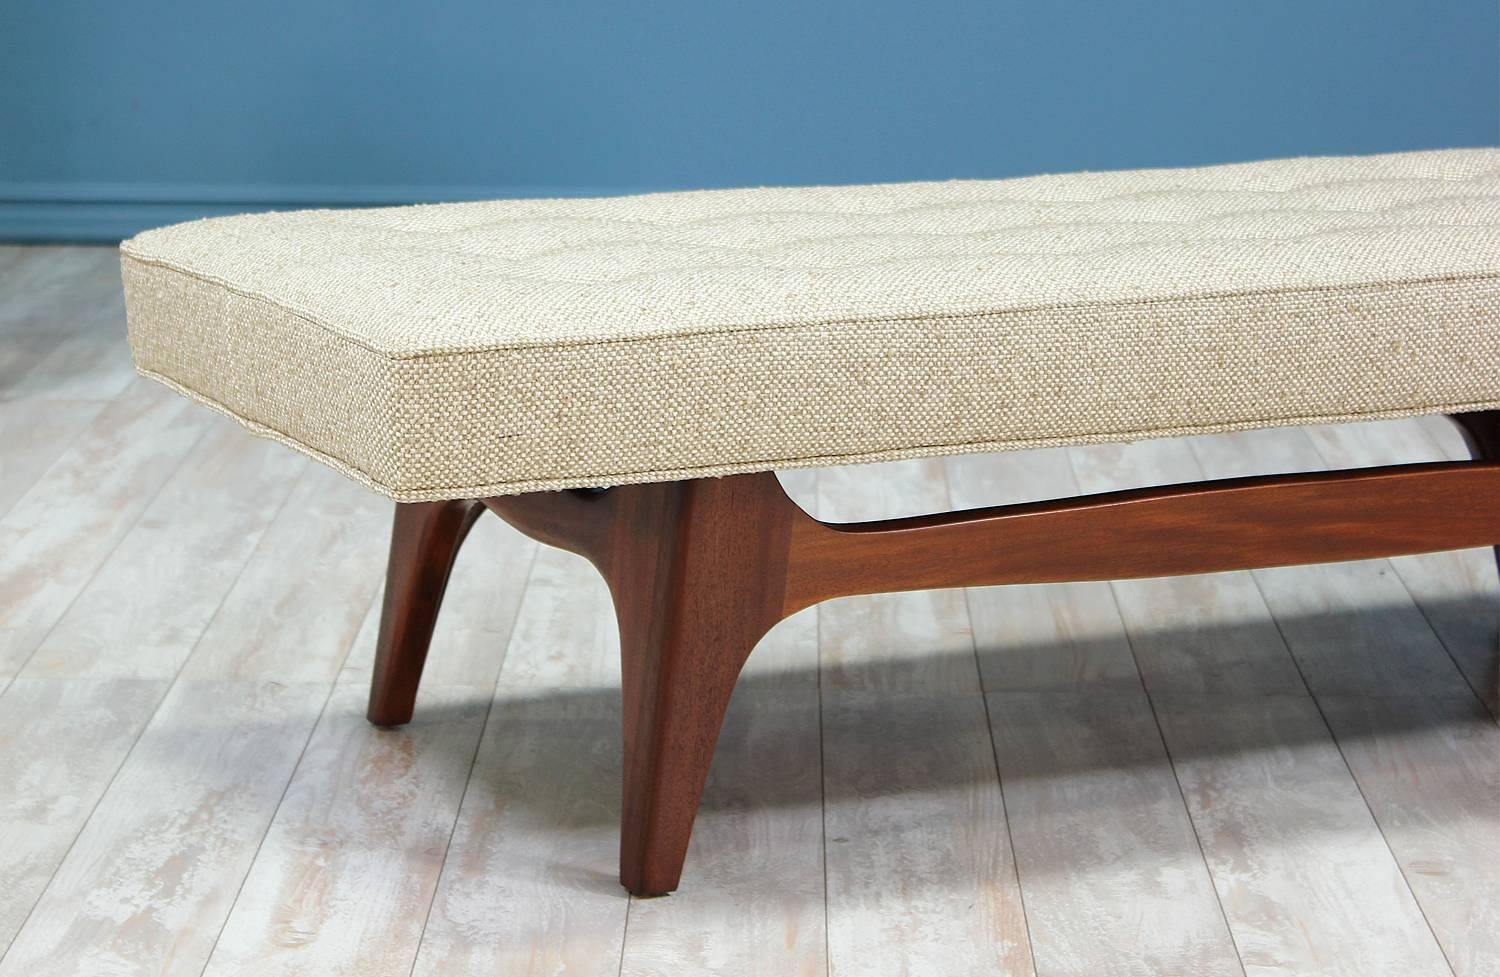 Mid Century Modern Bench manufactured in the United States circa 1960’s. This elegant bench features a sculptural solid walnut base and a new foam cushion upholstered with tufting in a textured cream-colored tweed fabric.